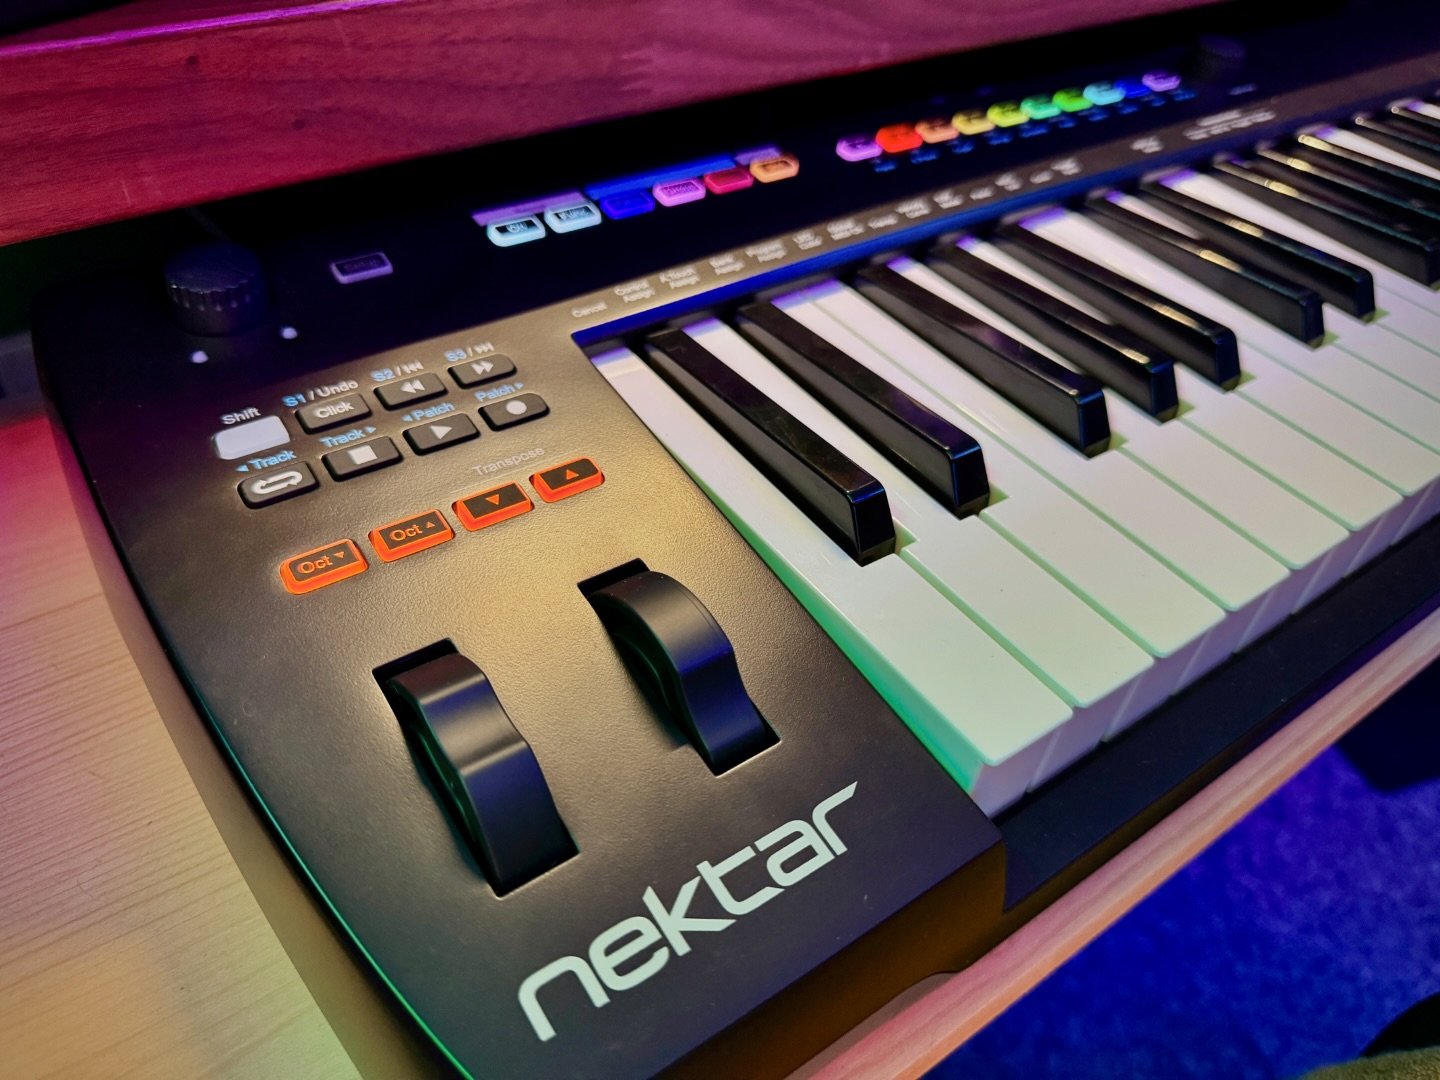 Over the years I&rsquo;ve never bothered using the transport controls or any other functions of a MIDI keyboard. I just used the keys and pitch/mod wheels. 

Today, I decided to install the @nektartech software to make my controller fully compatible 